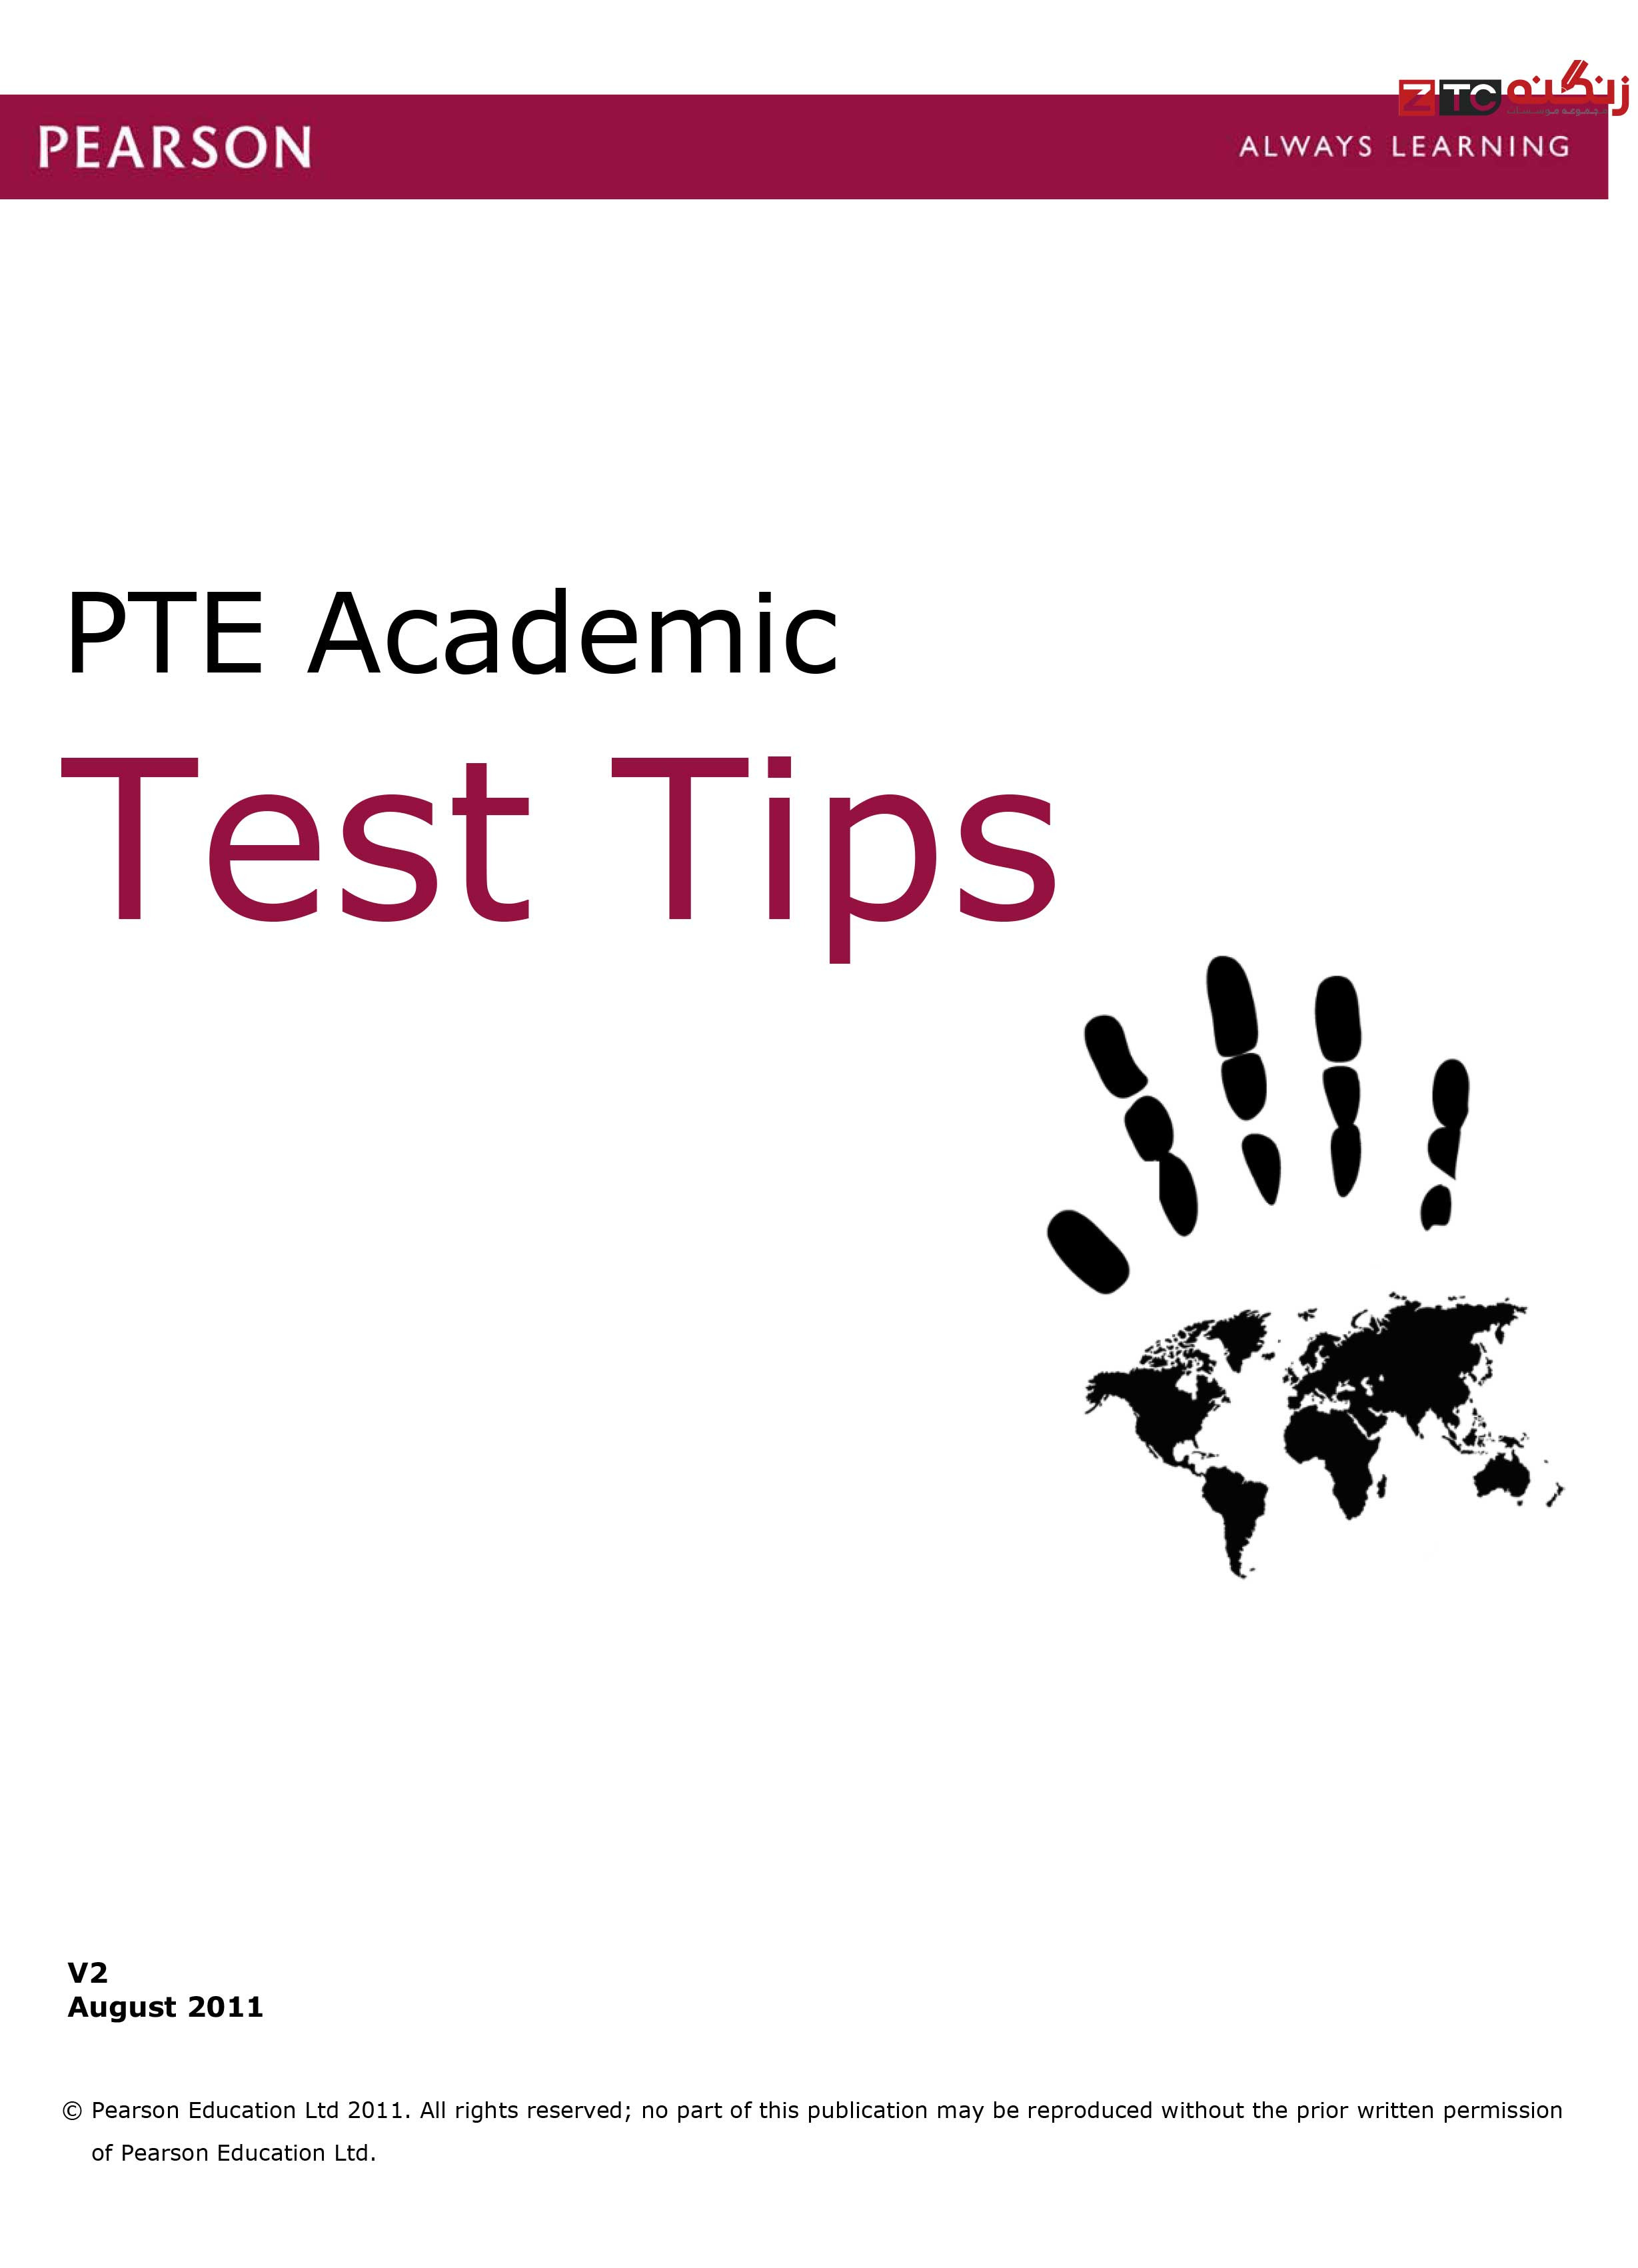 PTE Academic Test Tips